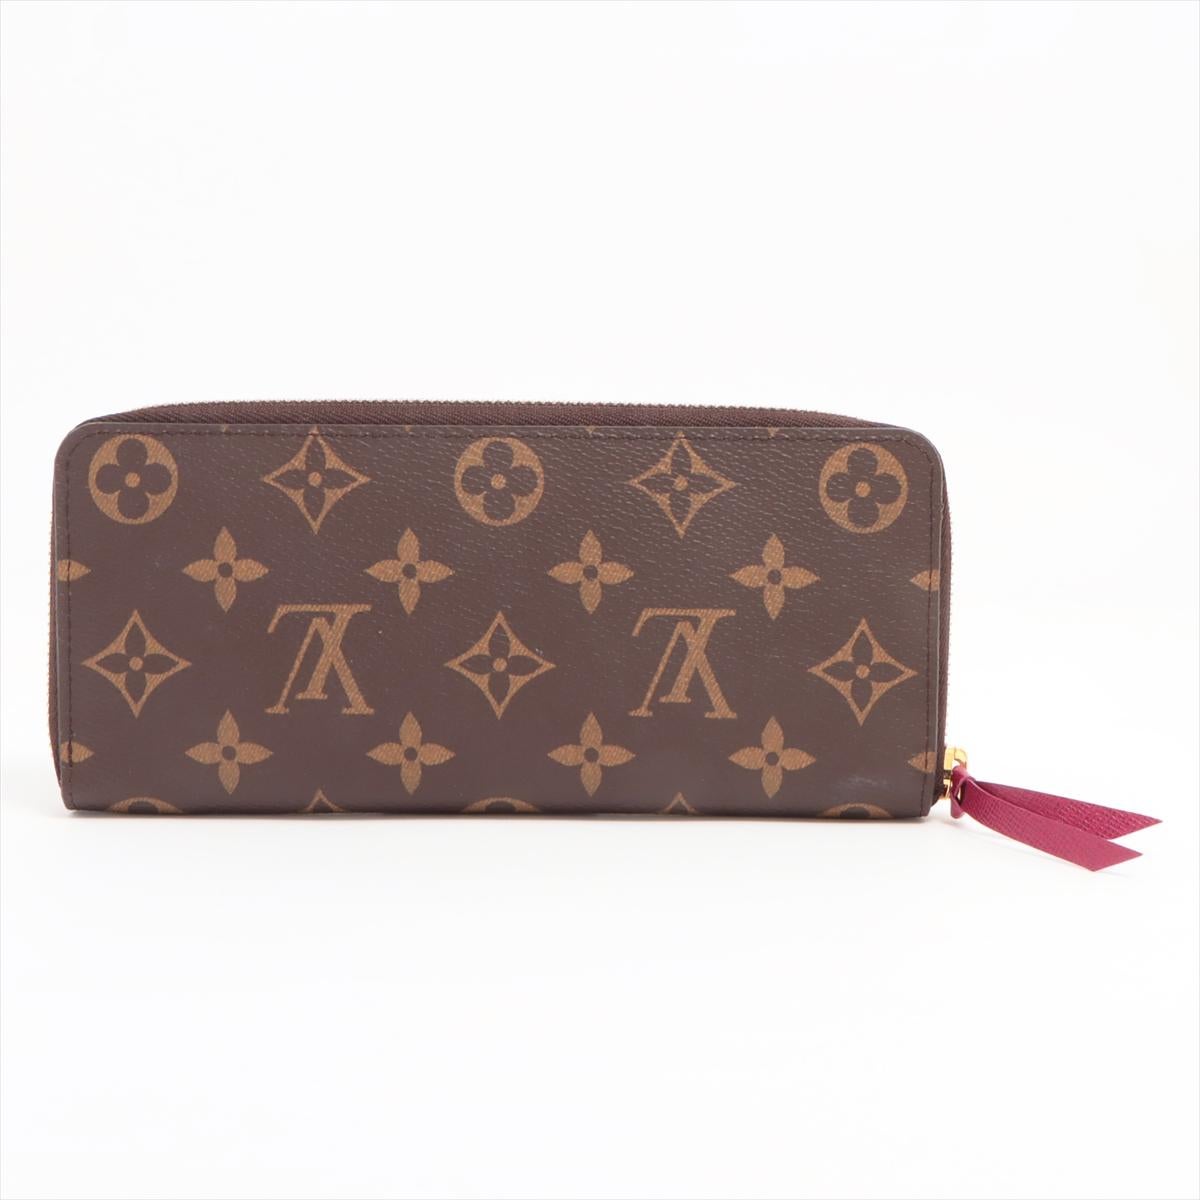 Louis Vuitton Monogram Clemence Long Wallet Fuchsia In Good Condition For Sale In Indianapolis, IN